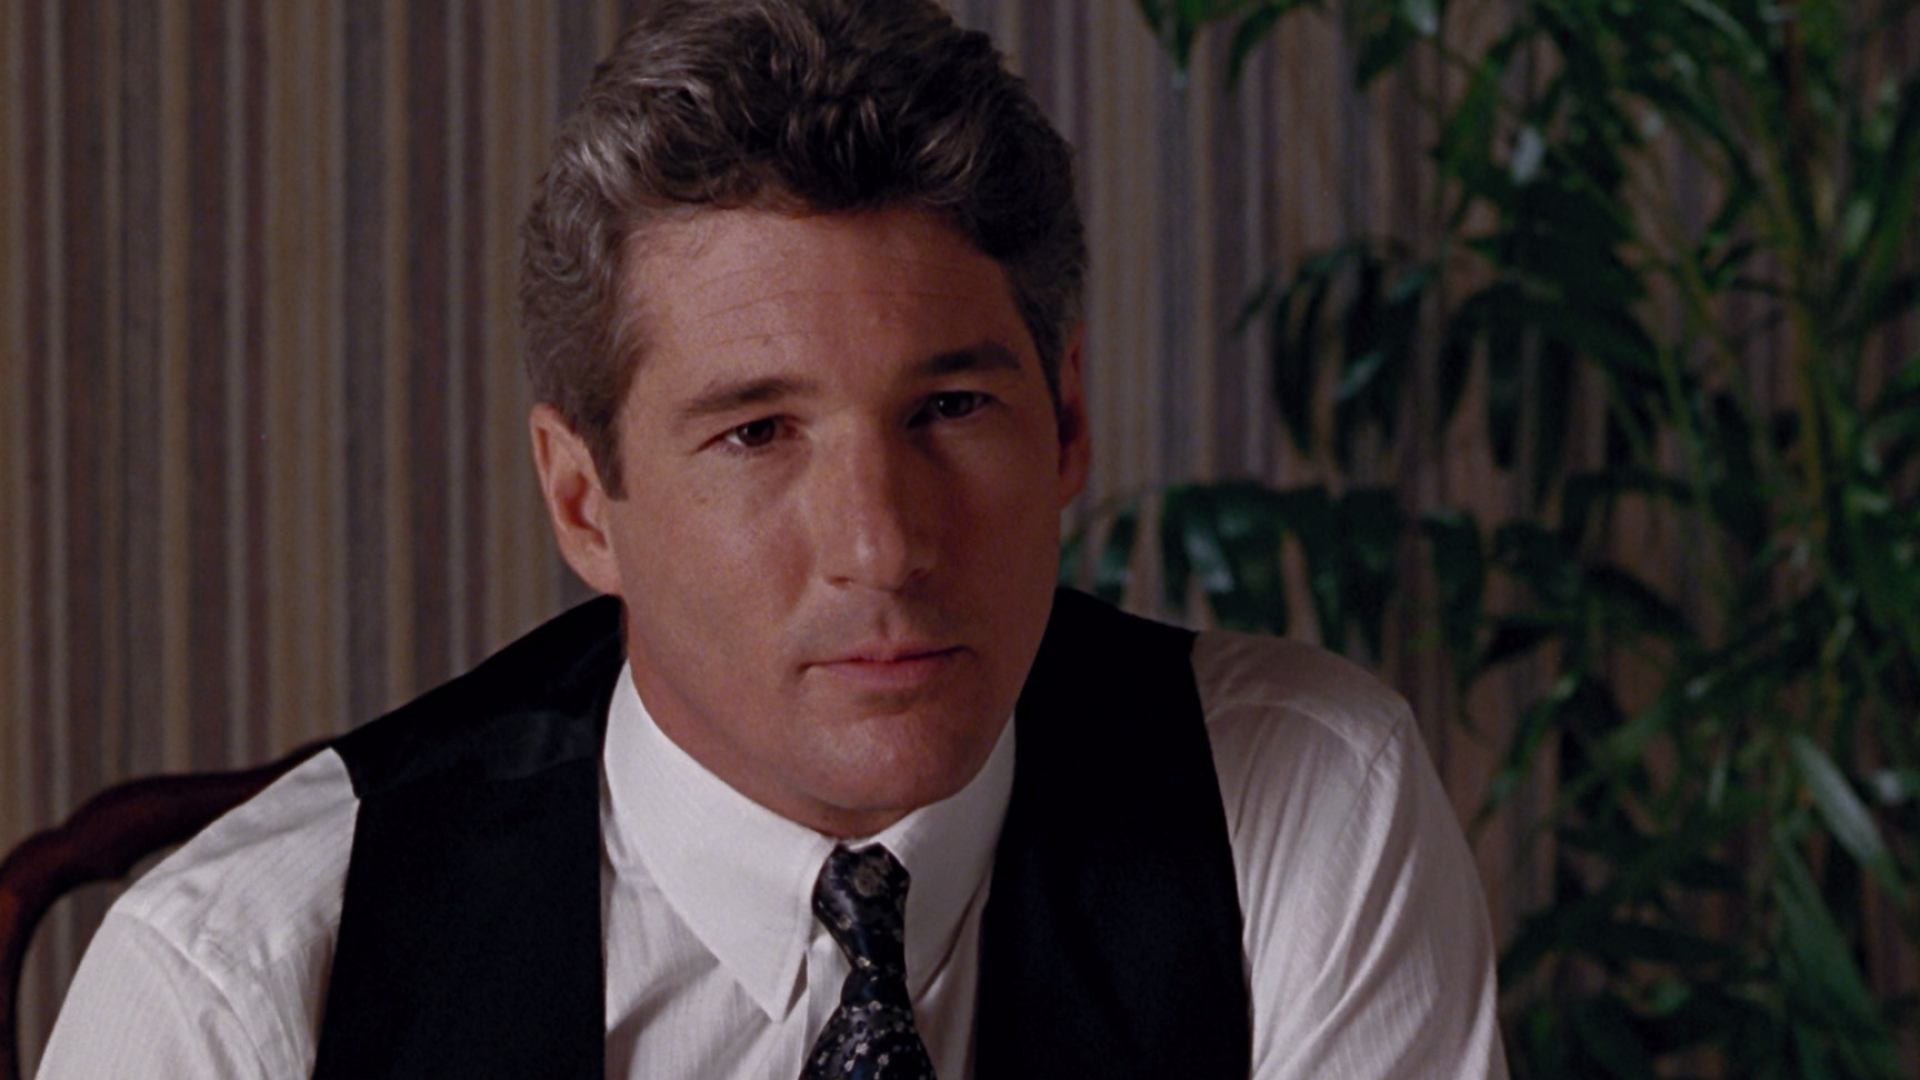 Richard Gere wallpapers posted by Ethan Simpson, Fan art, Online community, Movie enthusiasts, 1920x1080 Full HD Desktop